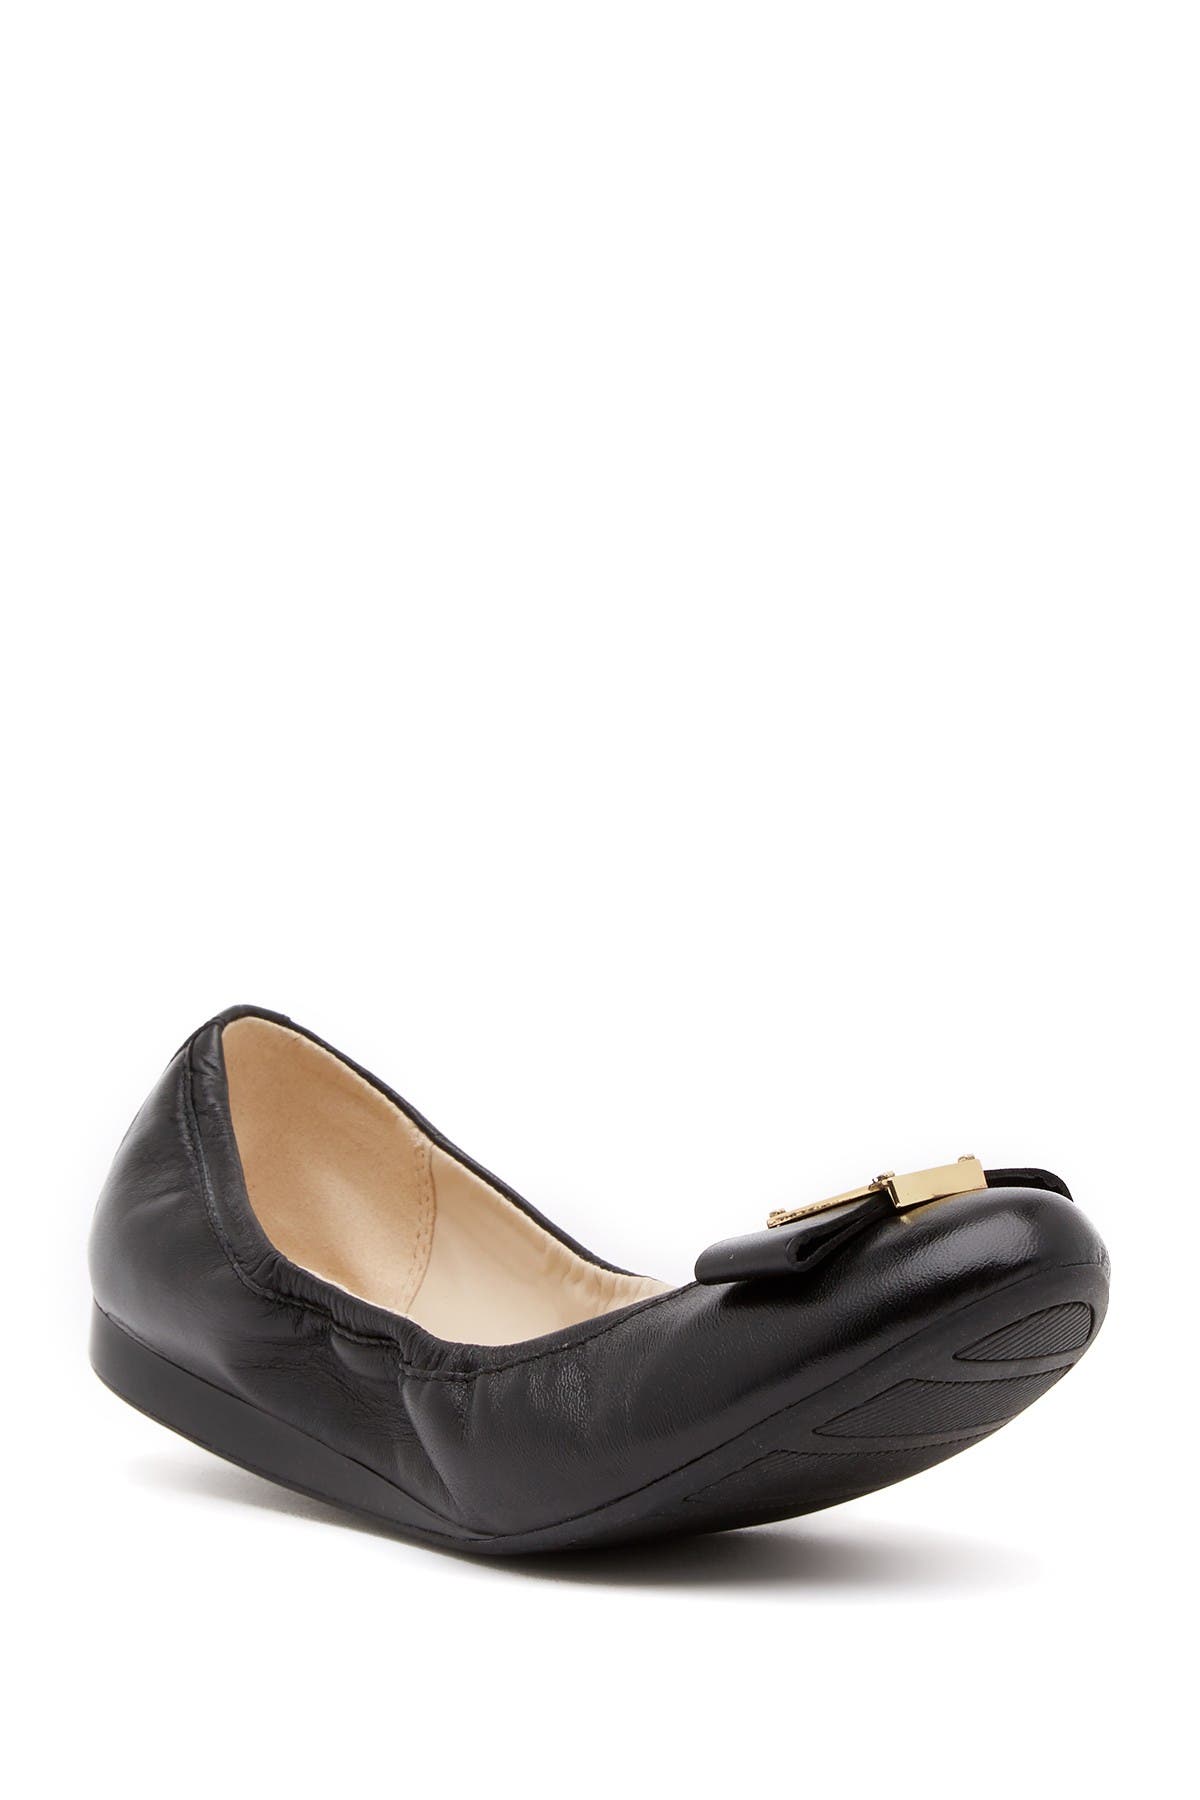 Cole Haan | Emory Bow Leather Ballet II 